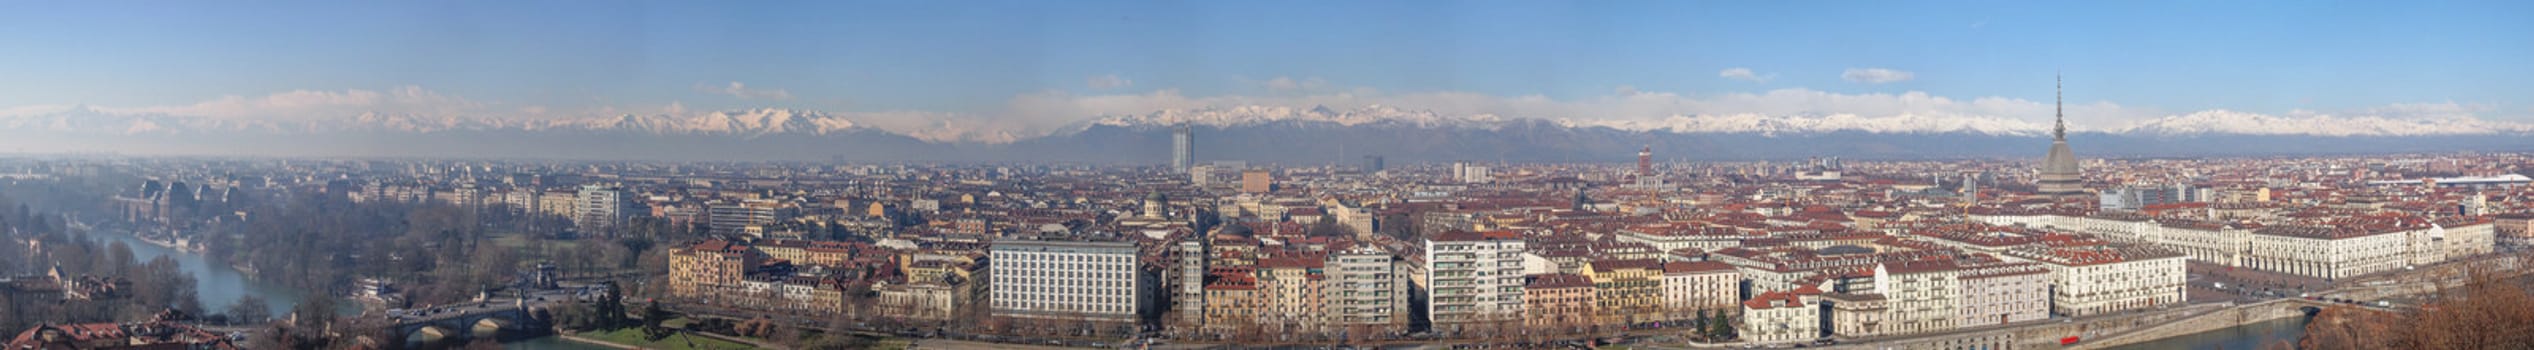 Panoramic view of Turin from the hills surrounding the town